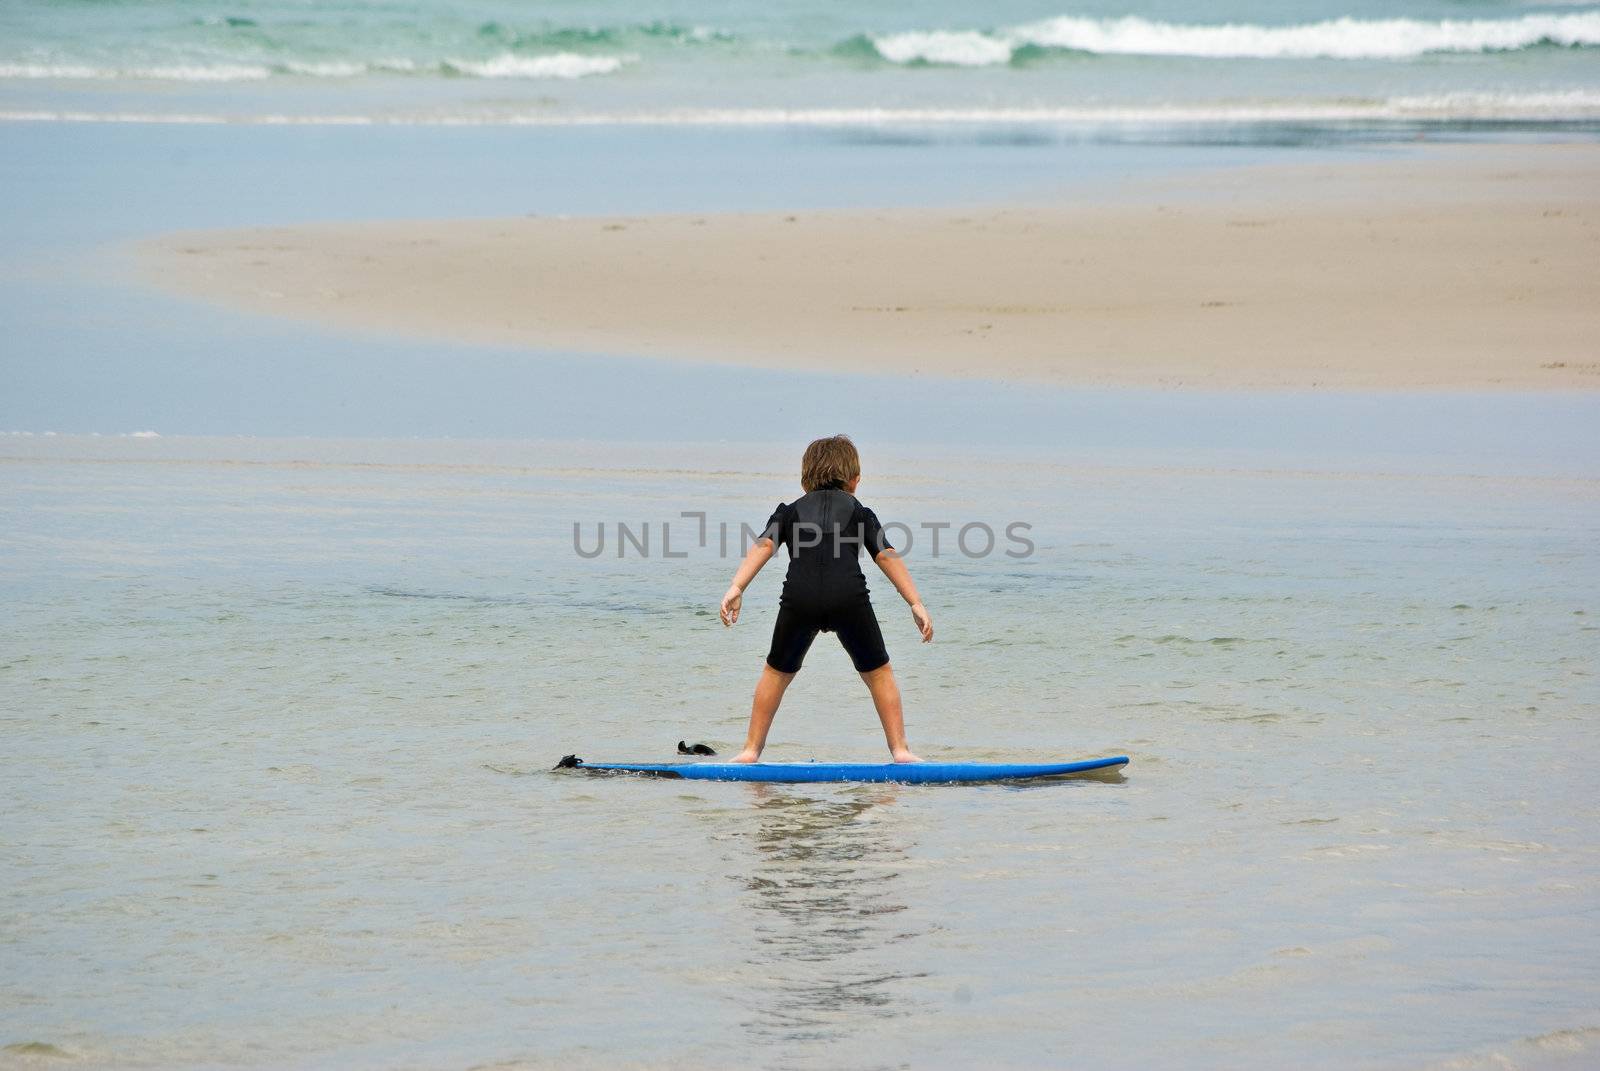 future champion got to start somewhere young boy learns to surf